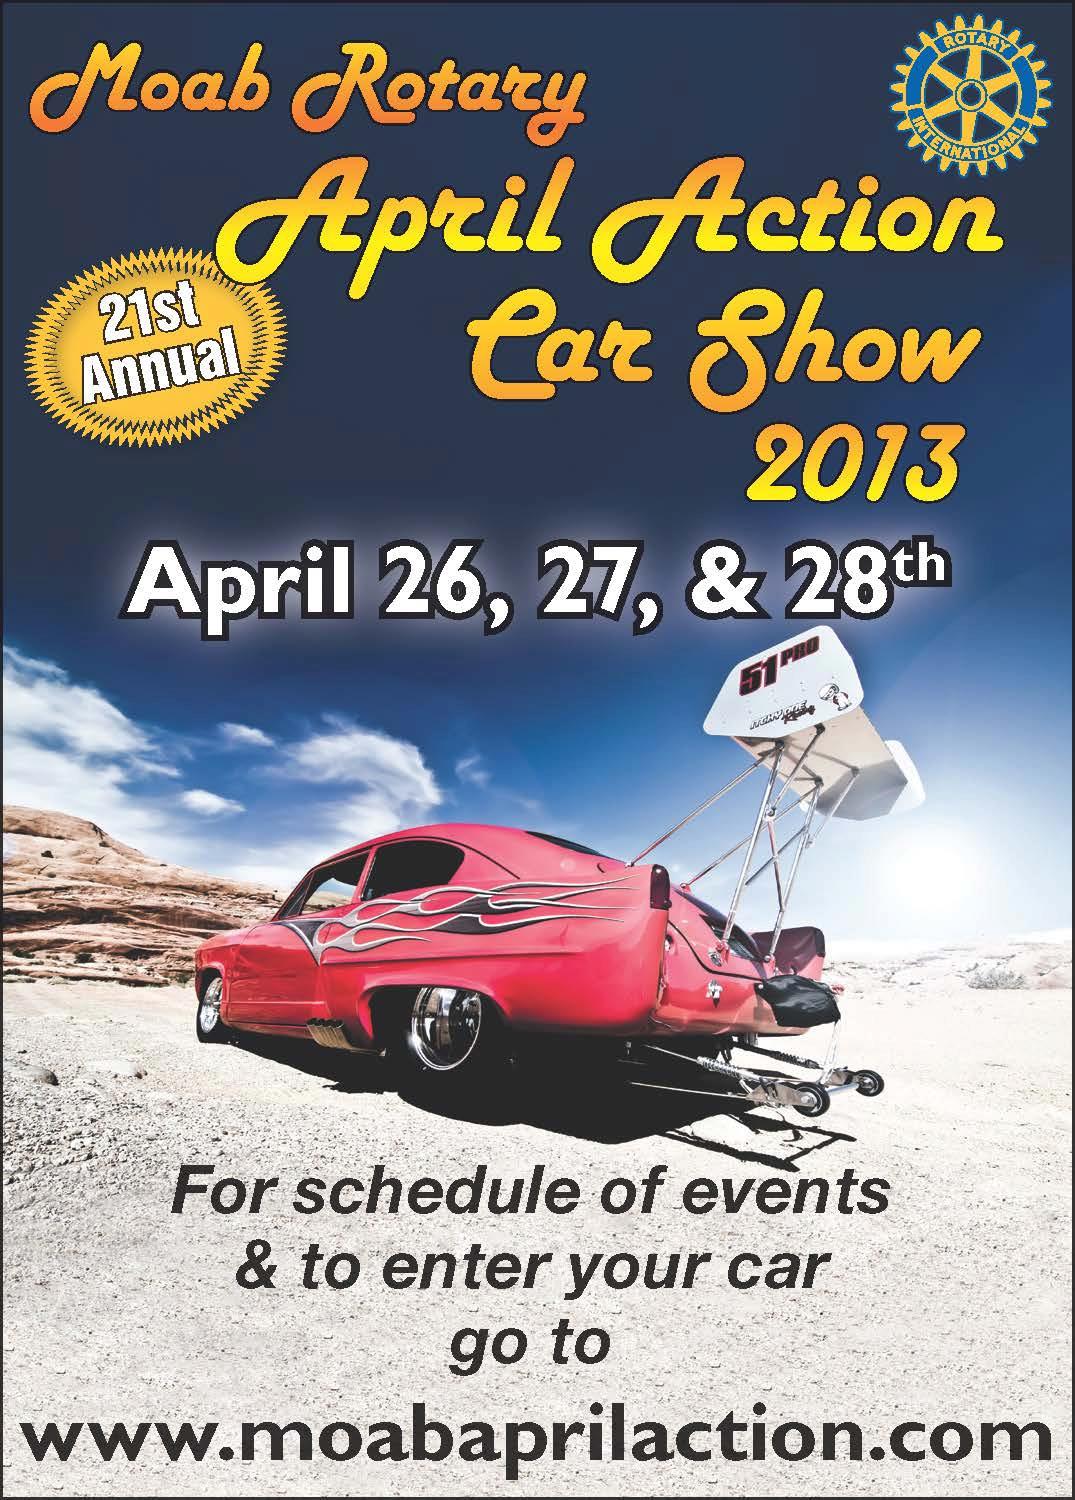 On the Road With Zoom April Action Car Show Moab, Utah